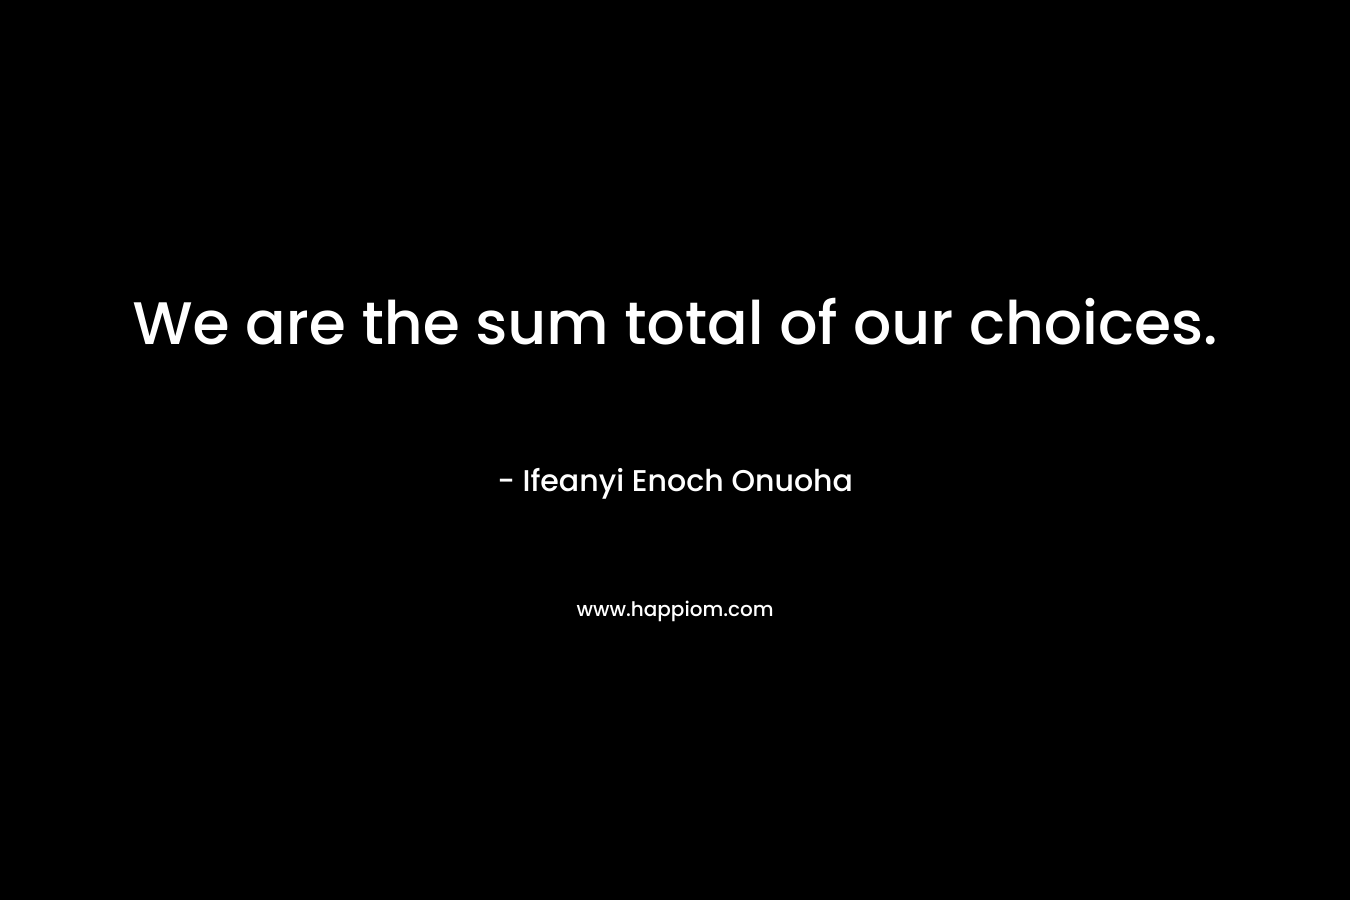 We are the sum total of our choices.